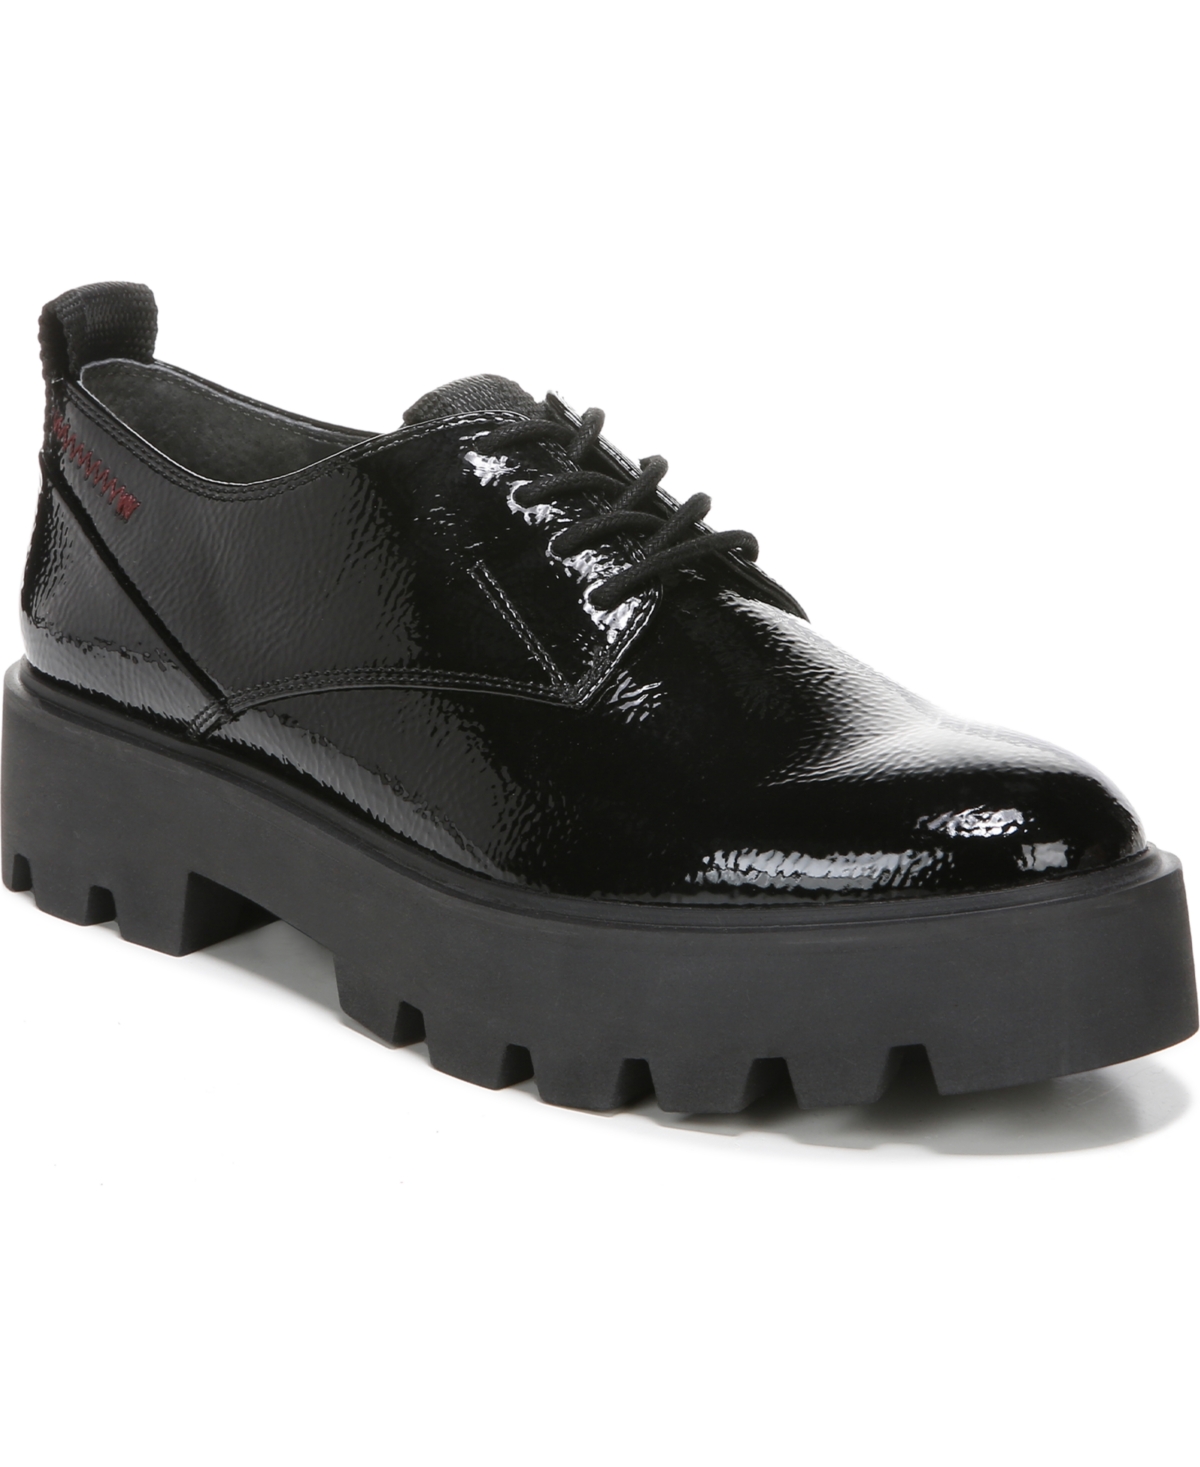 UPC 017138587310 product image for Franco Sarto Balin-Laced Lug Sole Oxfords Women's Shoes | upcitemdb.com